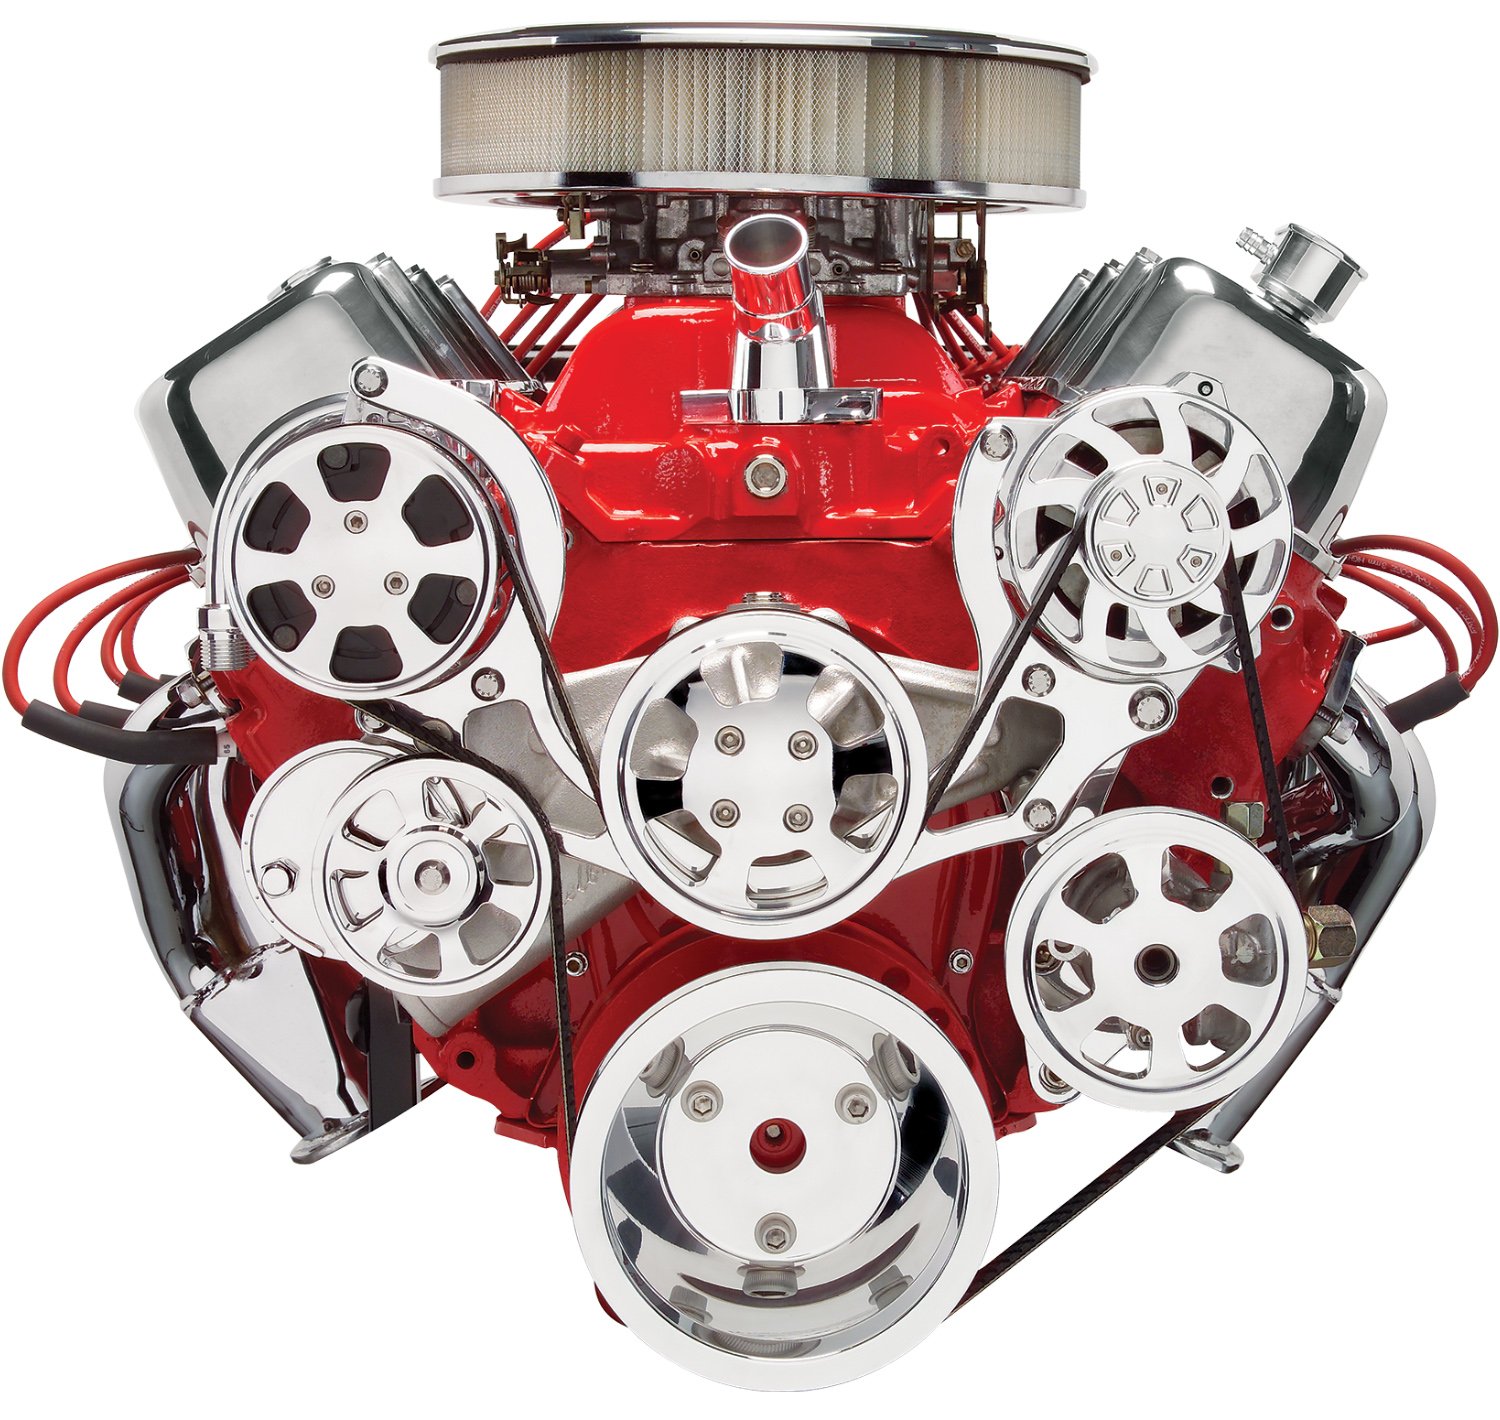 Premium Tru Trac Serpentine System Big Block Chevy with Power Steering, with A/C - Polished Finish